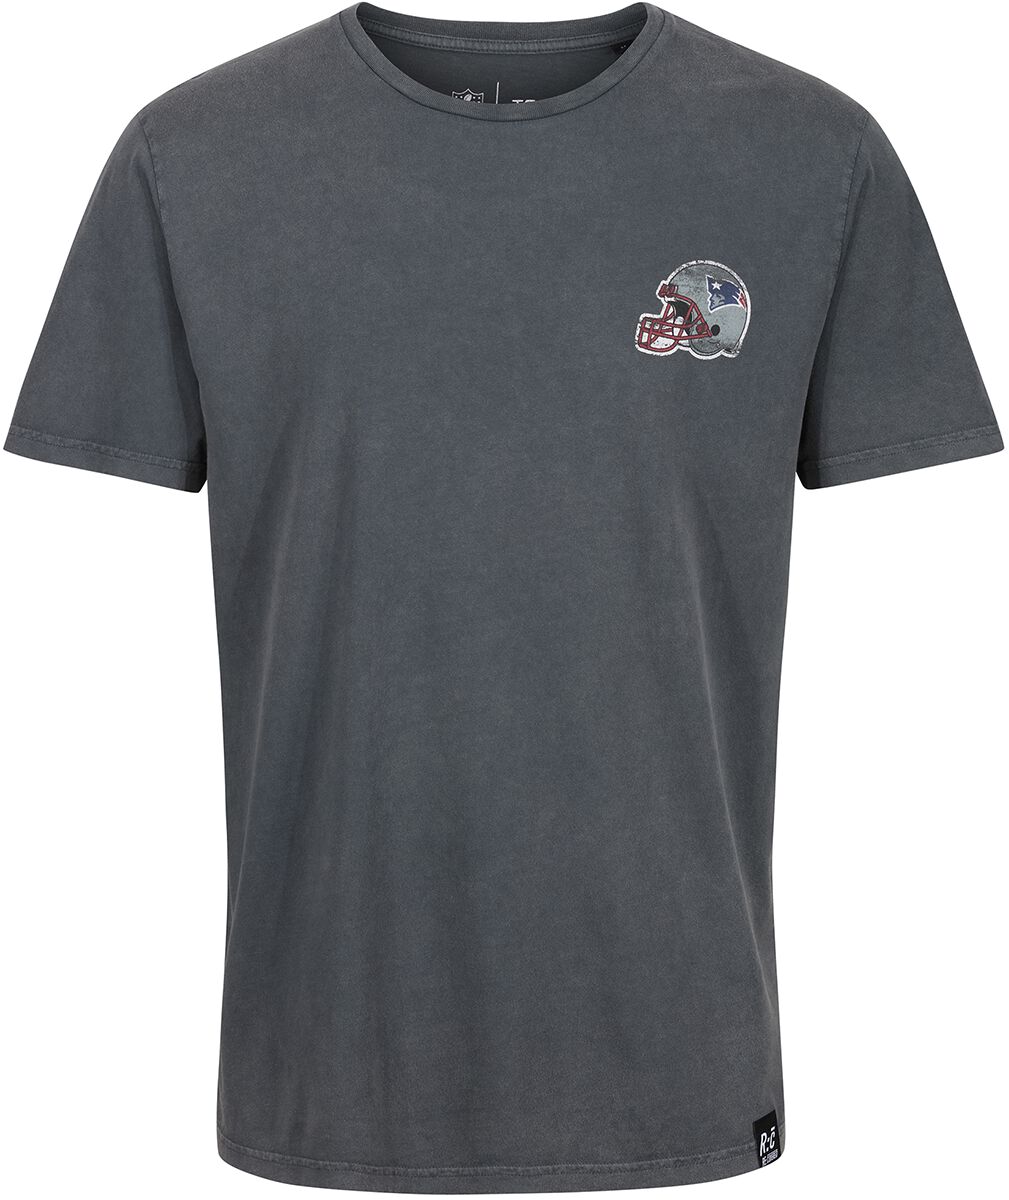 NFL NFL PATRIOTS COLLEGE BLACK WASHED T-Shirt multicolor in S